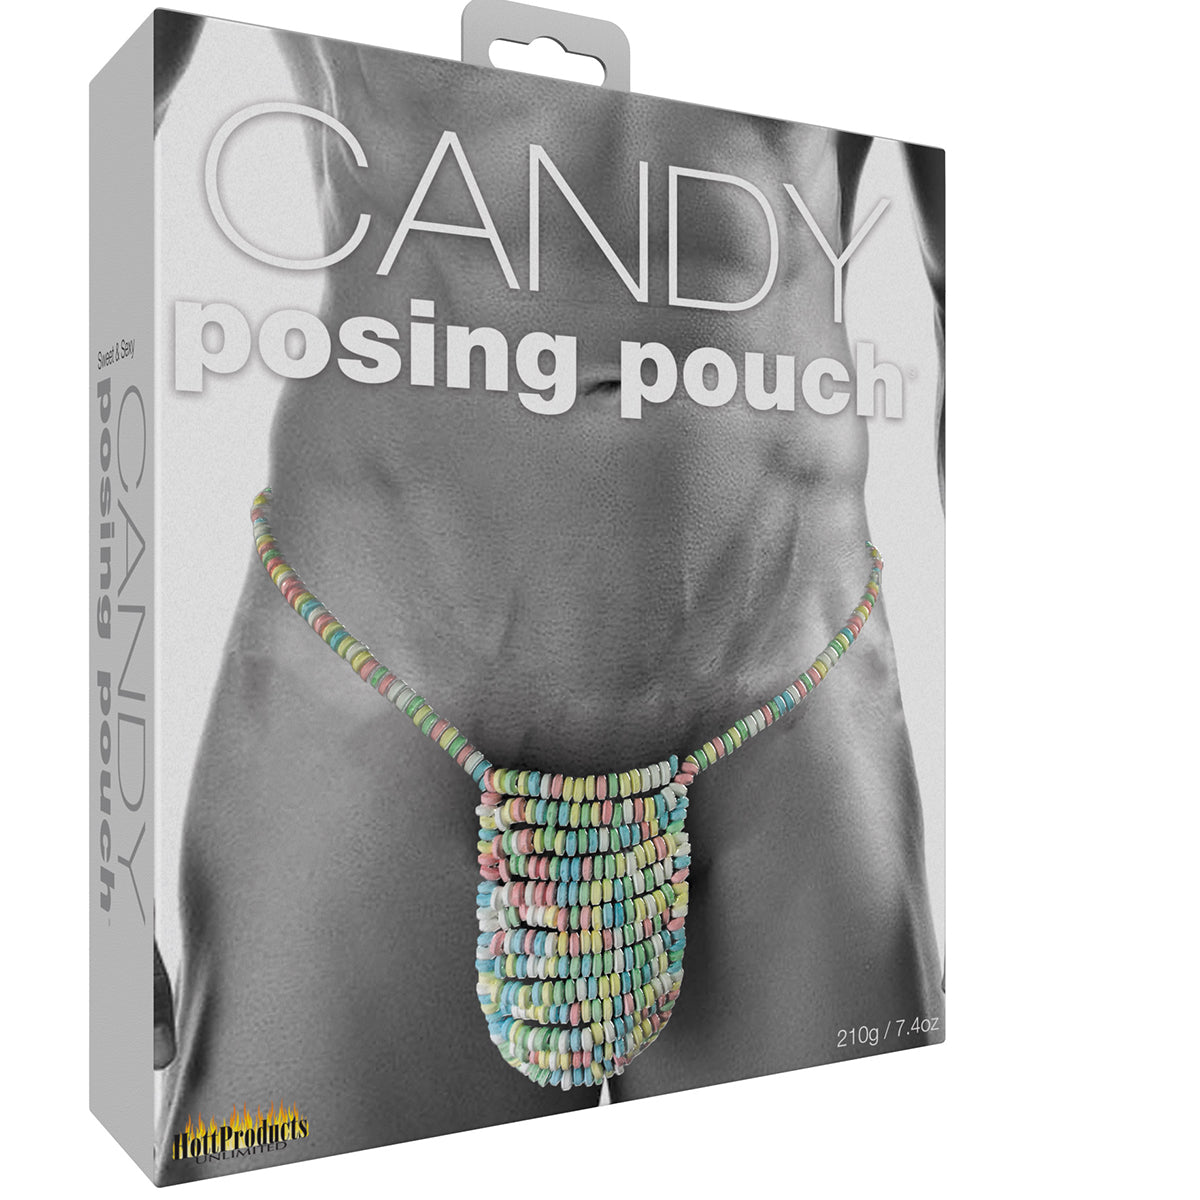 Spencer & Fleetwood Candy Male Posing Pouch